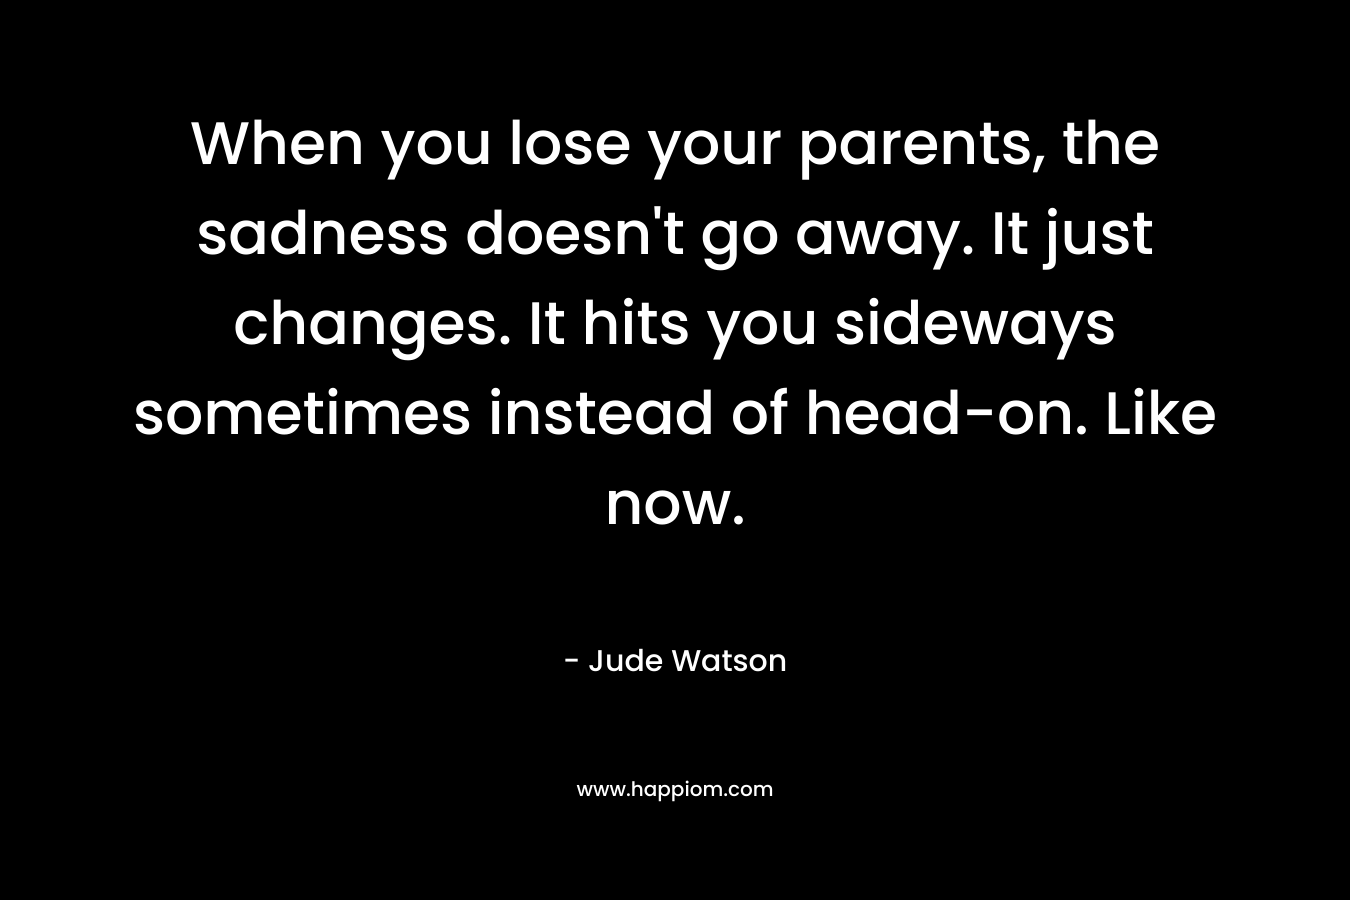 When you lose your parents, the sadness doesn't go away. It just changes. It hits you sideways sometimes instead of head-on. Like now.